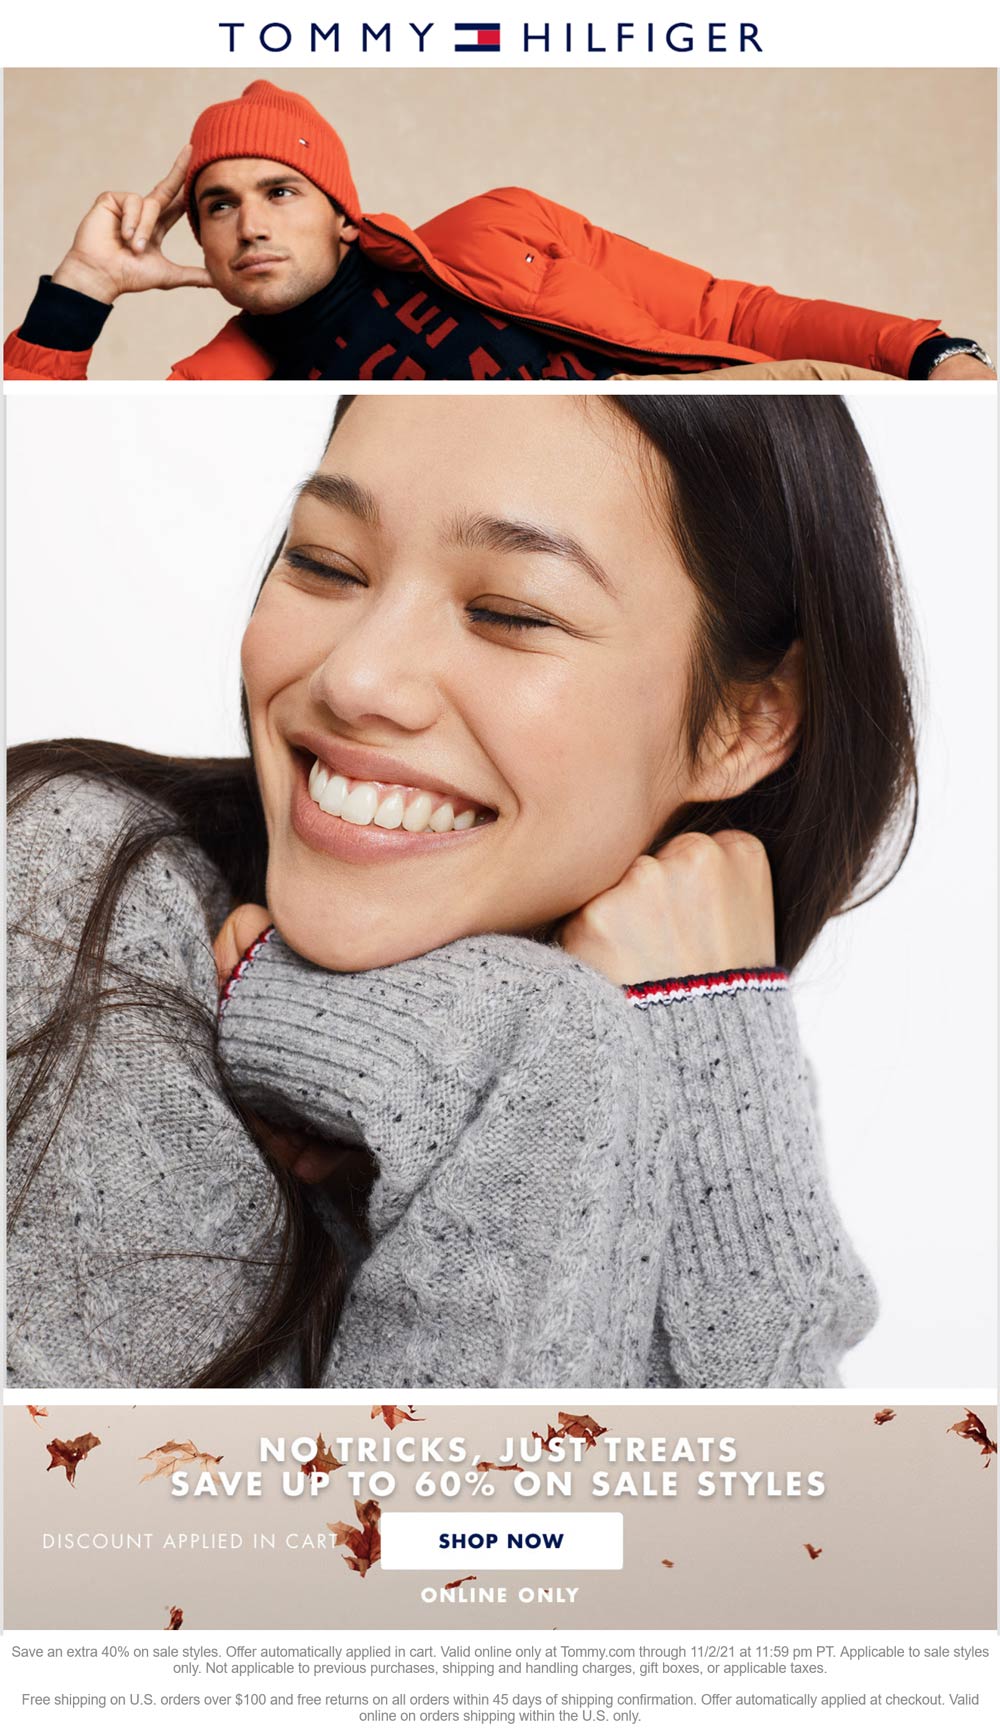 Tommy Hilfiger stores Coupon  Extra 40% off sale styles online at Tommy Hilfiger #tommyhilfiger 